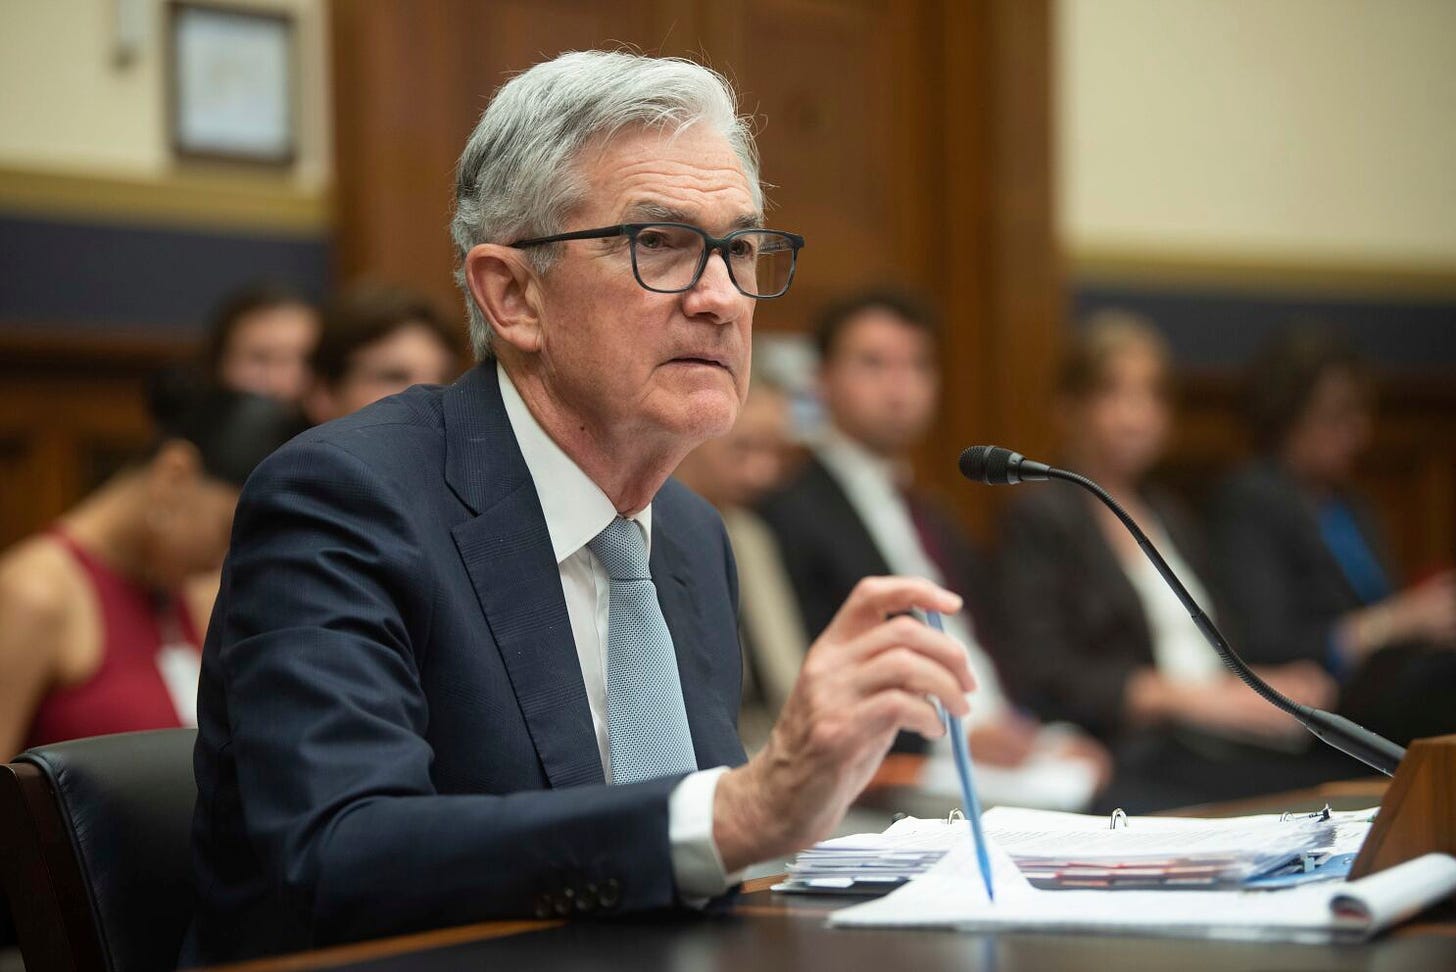 Federal Reserve chair Jerome Powell: 'No guarantee' Fed can tame inflation,  spare jobs - Chicago Sun-Times